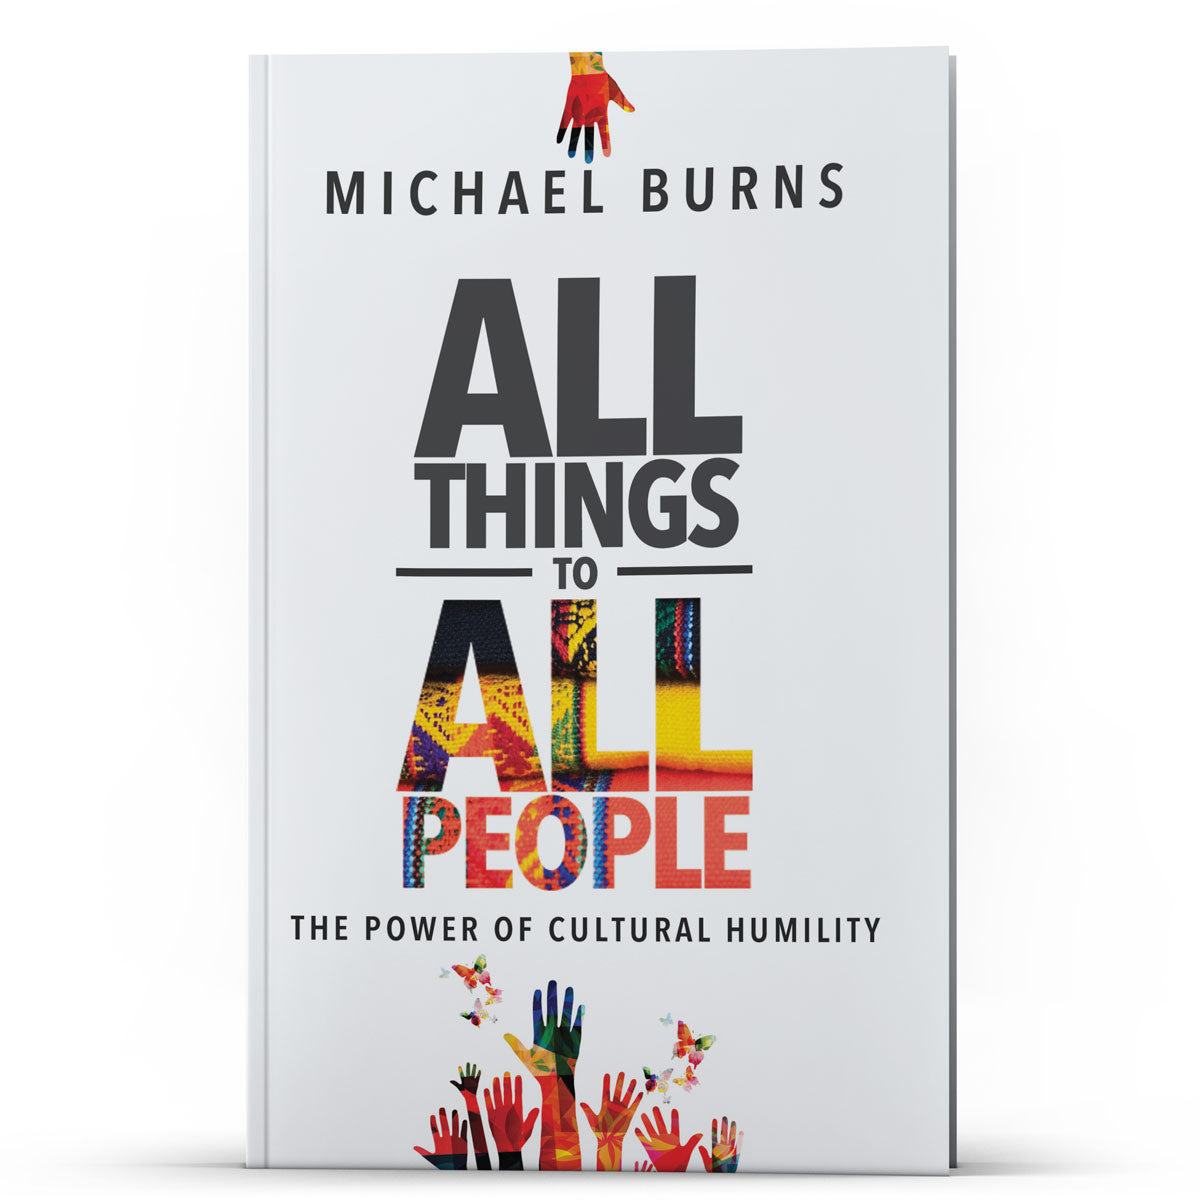 All Things to All People - Illumination Publishers